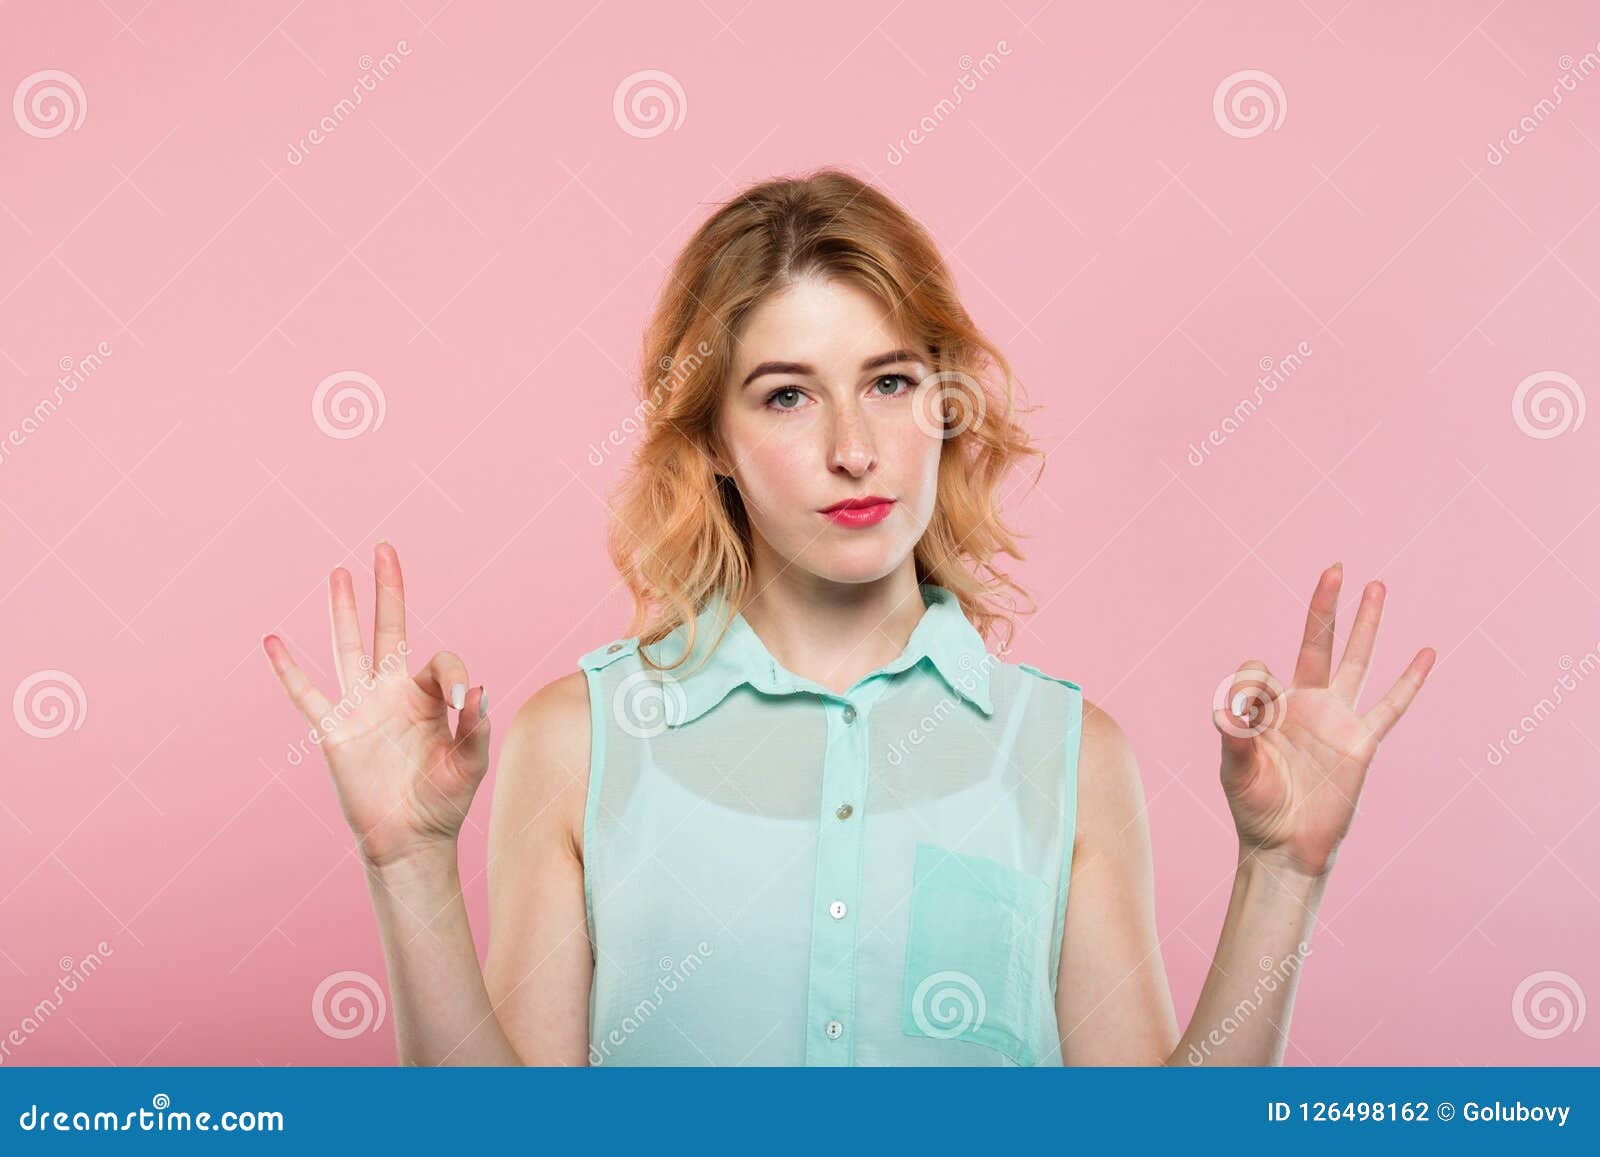 ok gesture woman showing sign hands sarcasm irony